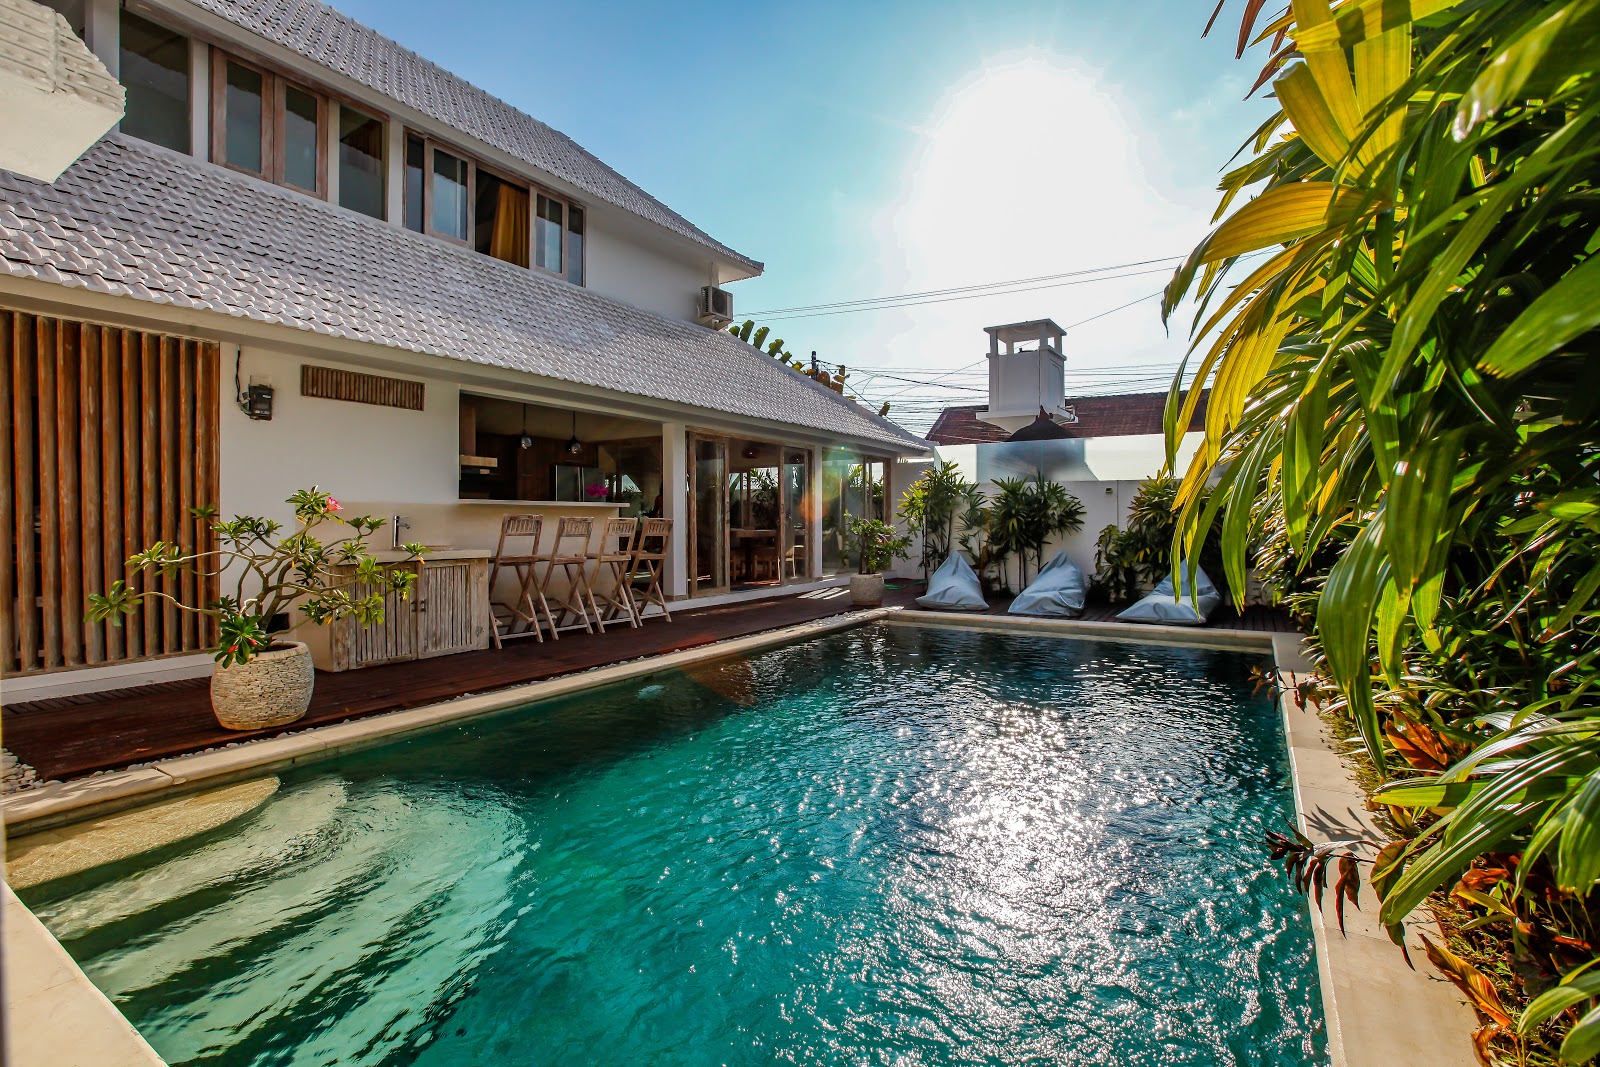 Bali Real Estate: Sharp Increase in property Purchase in Bali - HOUSE